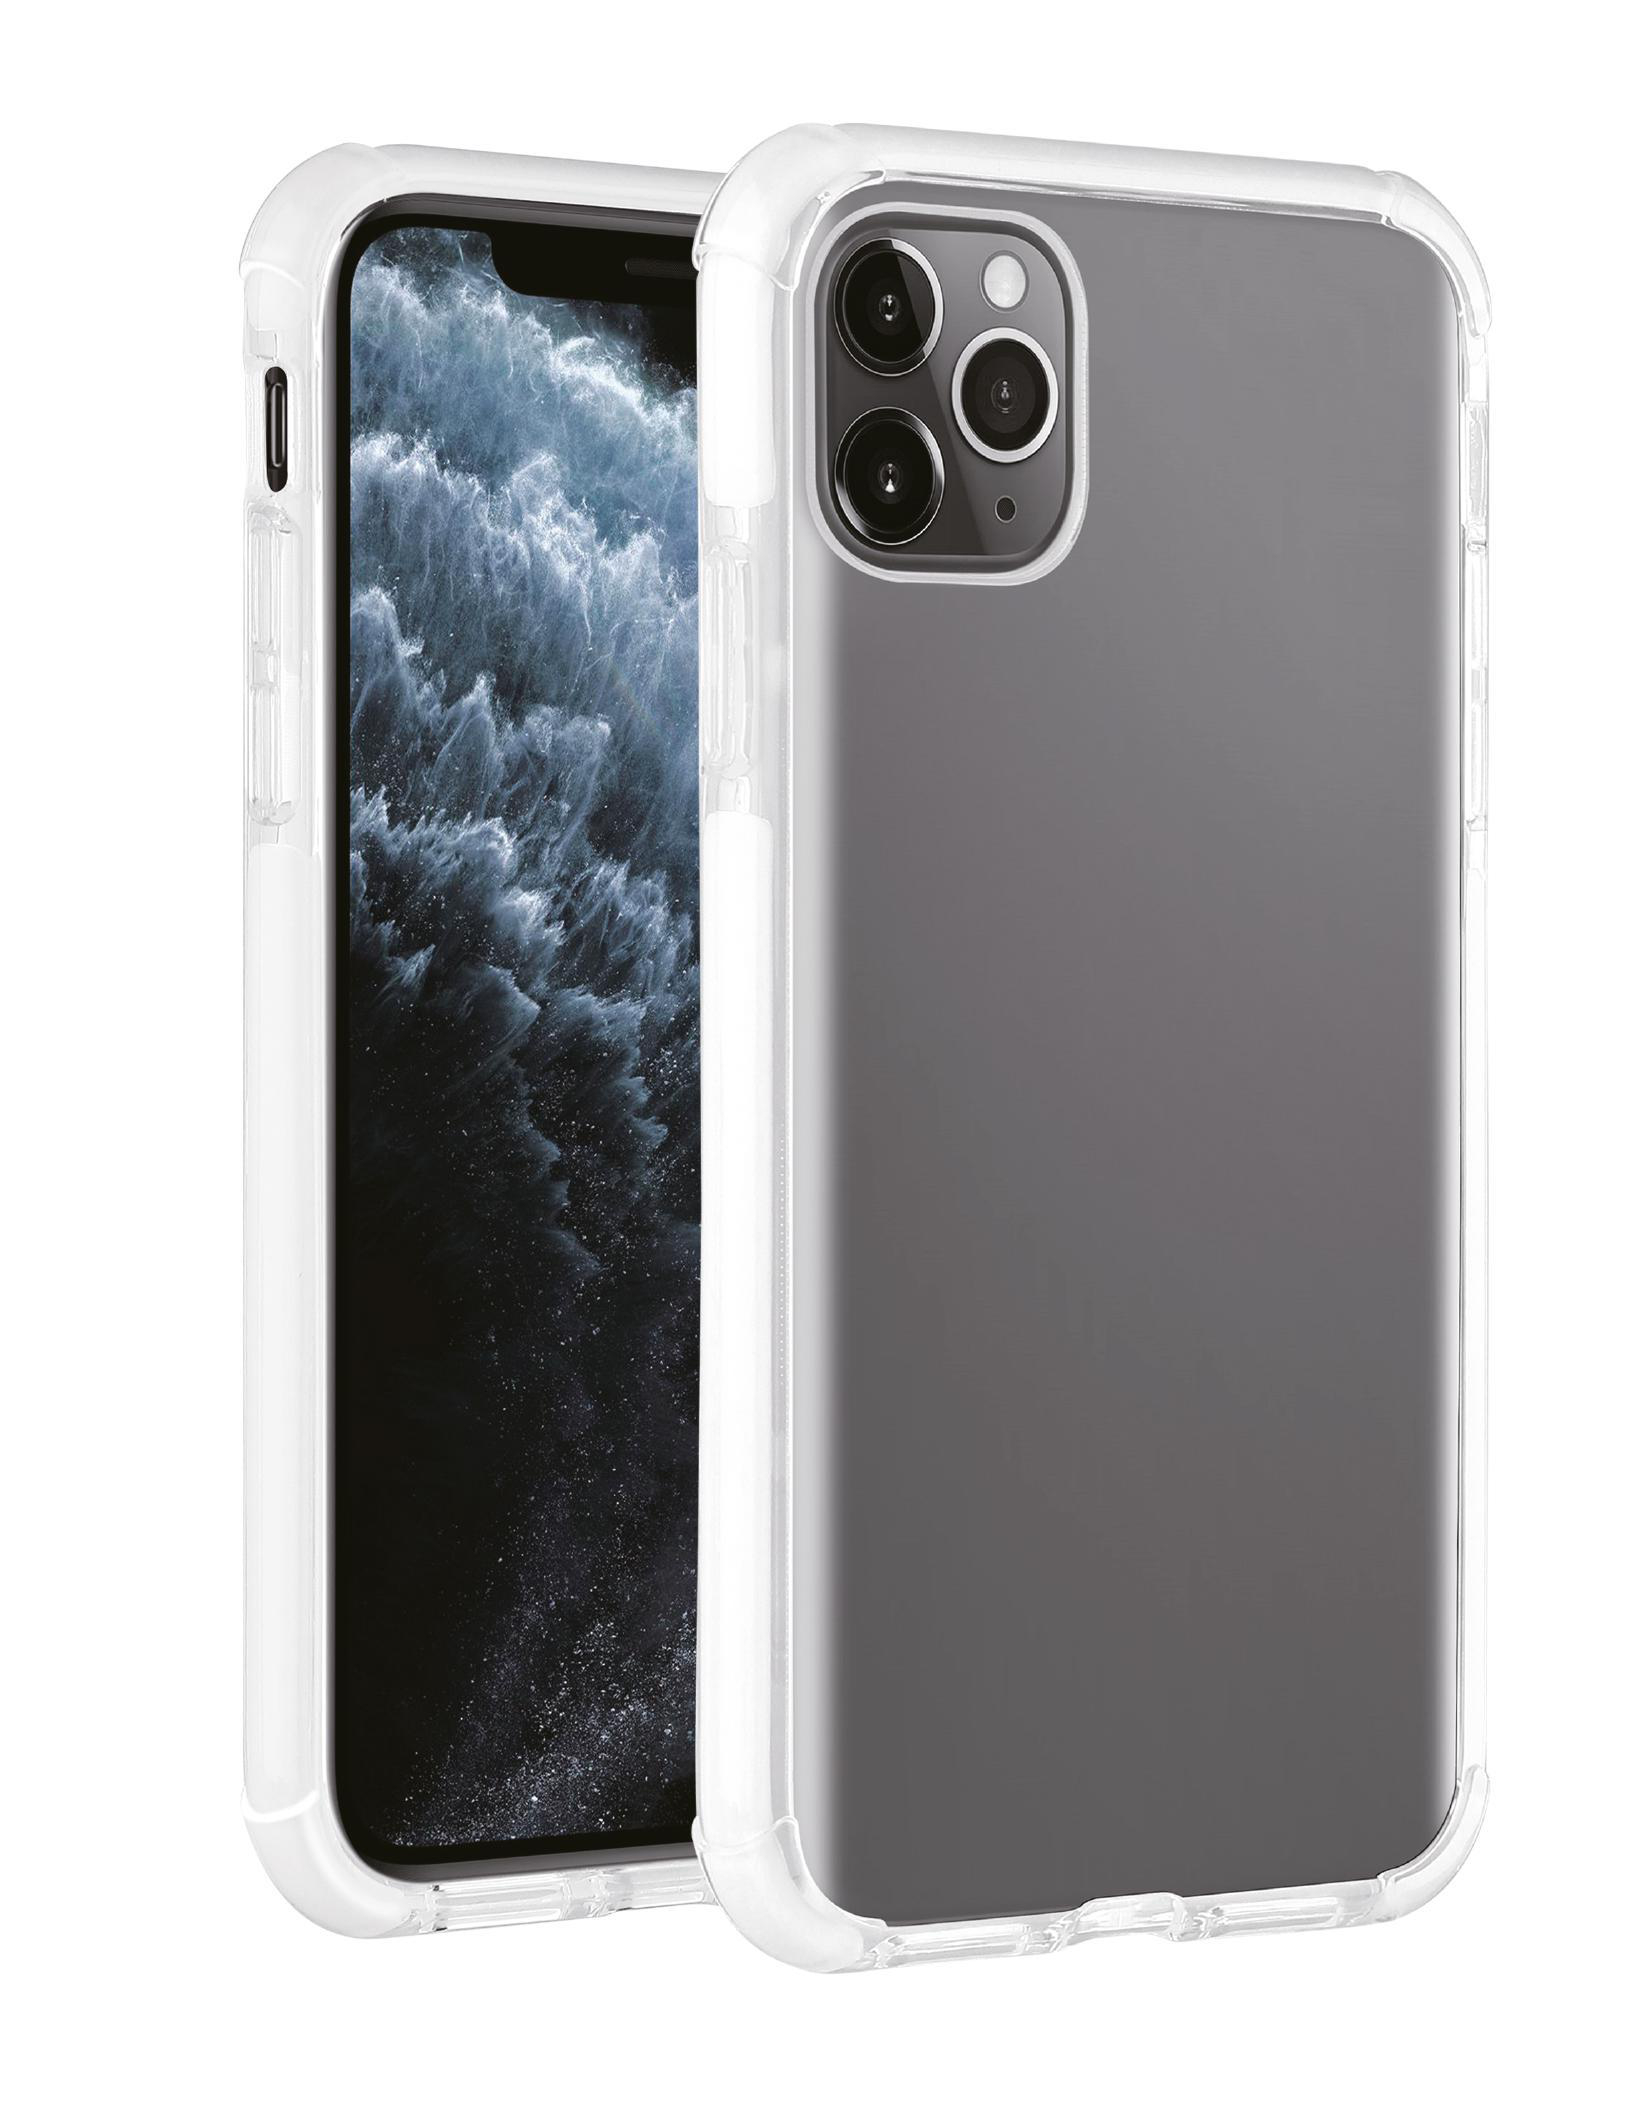 Pro, VIVANCO 11 Transparent/Weiß Rock Solid, iPhone, Backcover,